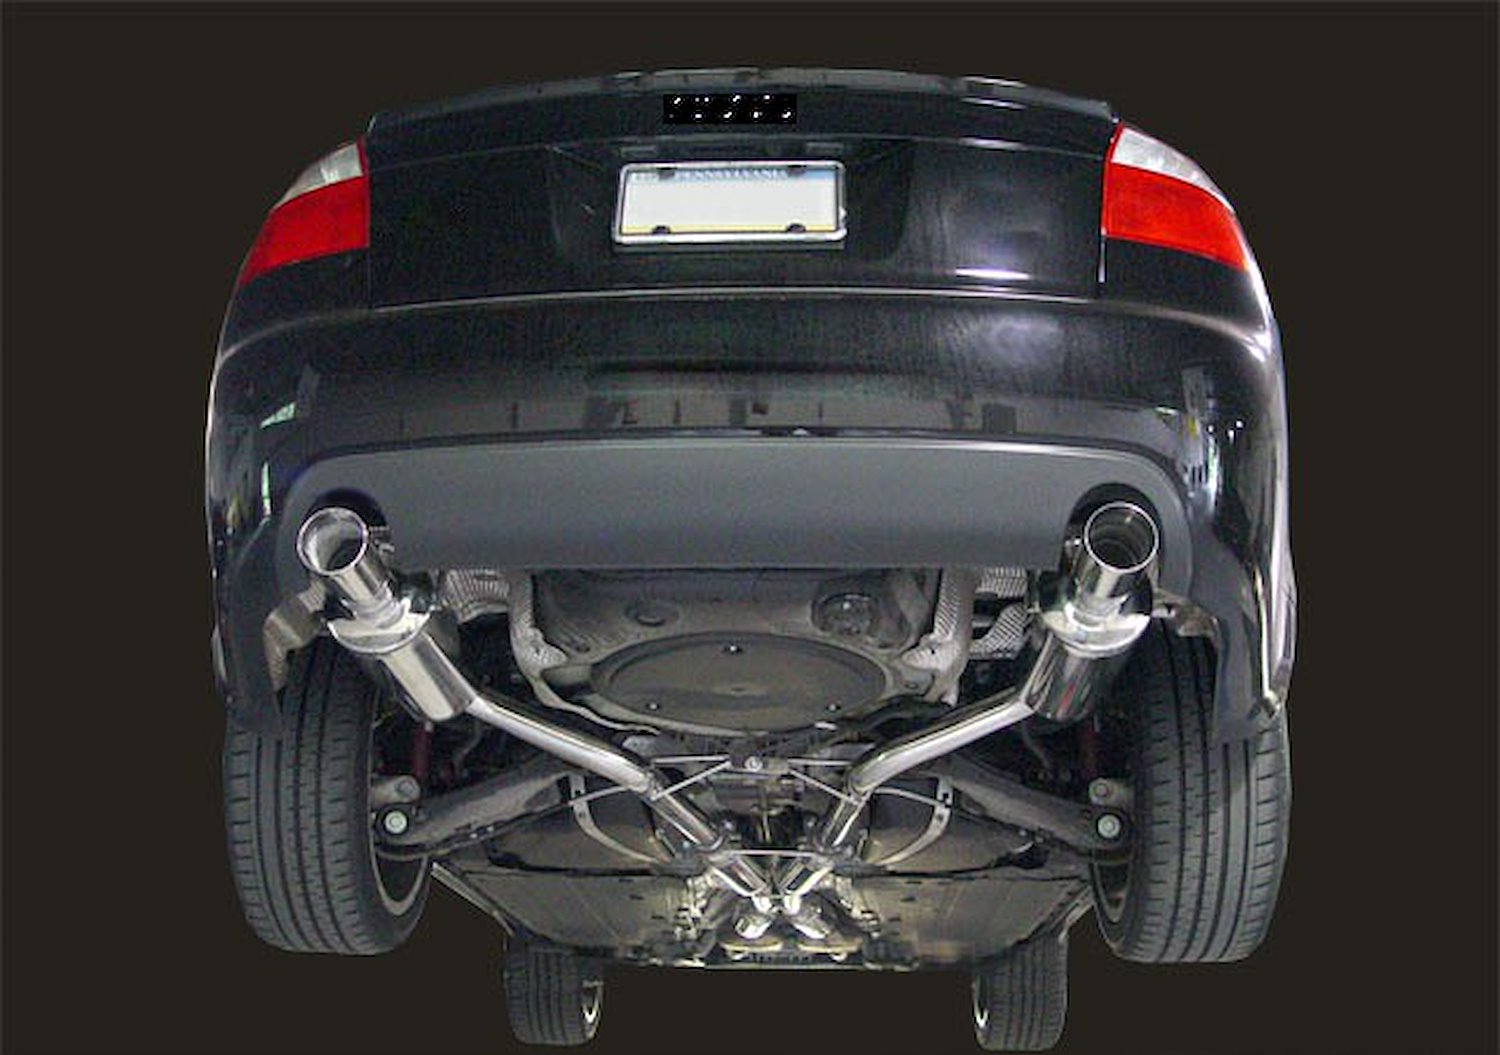 Touring Edition Exhaust for B6 A4 3.0L - Polished Silver Tips